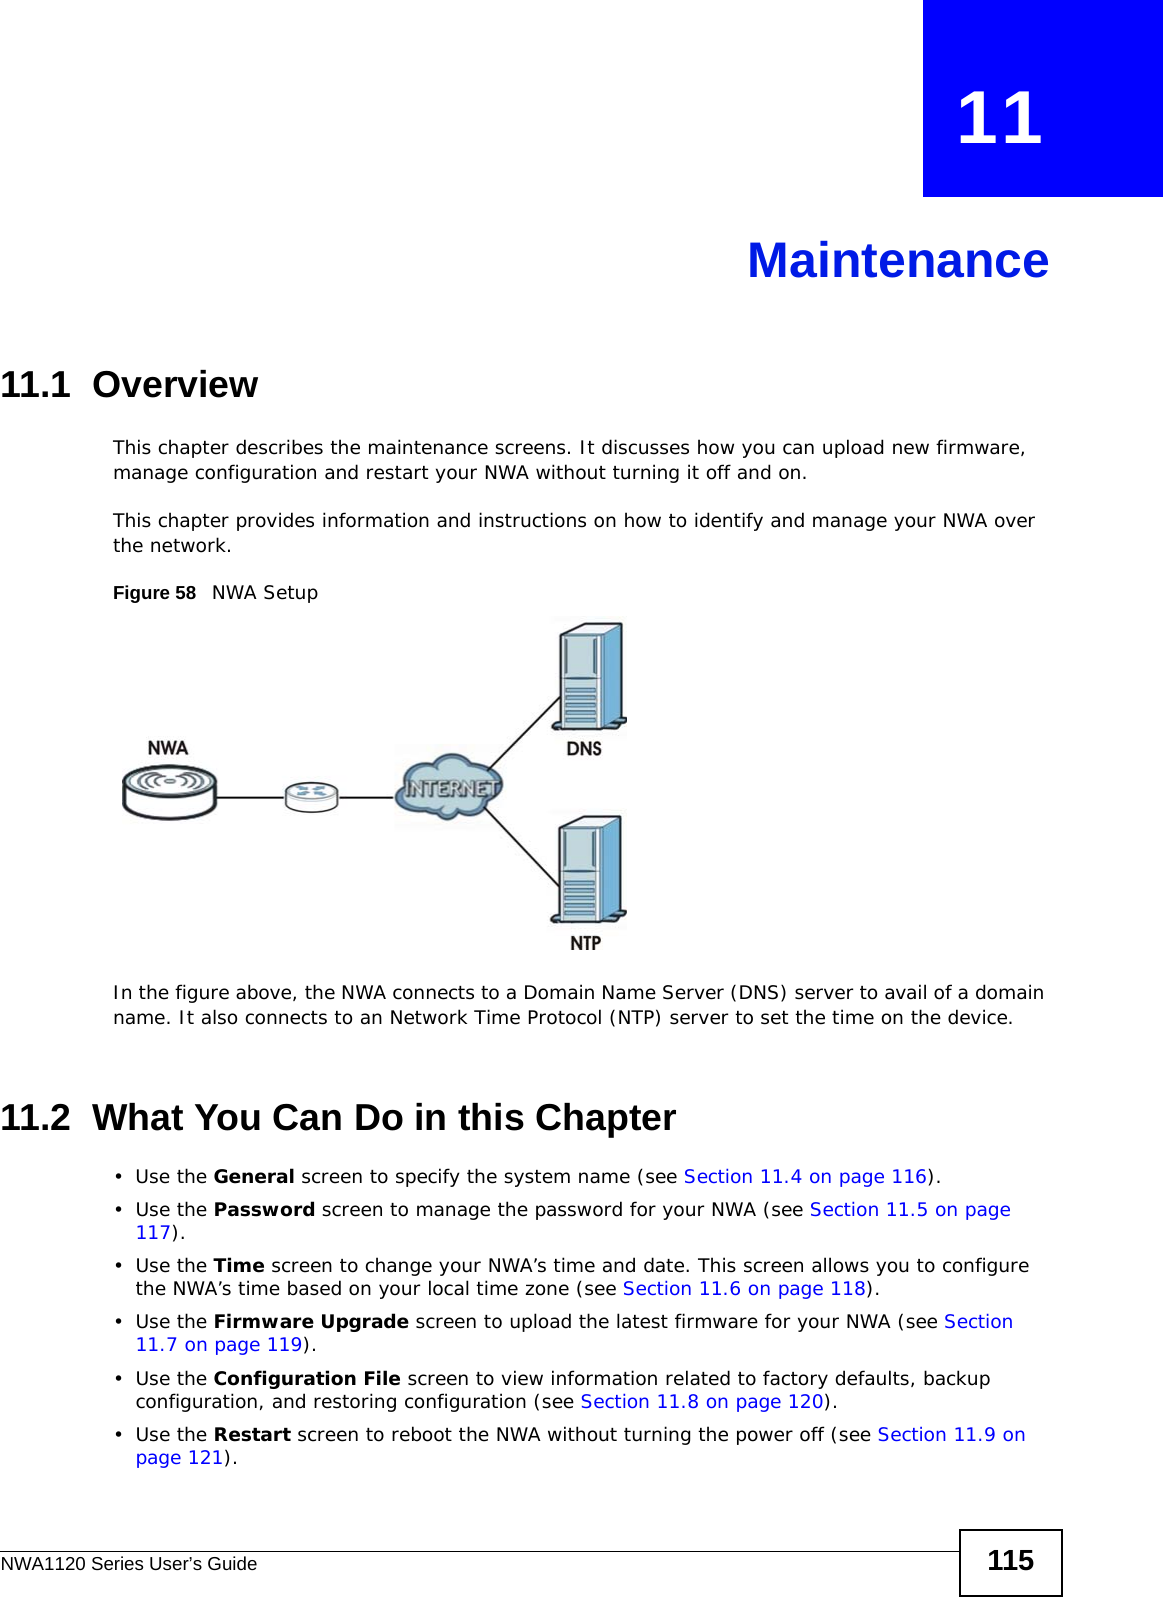 NWA1120 Series User’s Guide 115CHAPTER   11Maintenance11.1  OverviewThis chapter describes the maintenance screens. It discusses how you can upload new firmware, manage configuration and restart your NWA without turning it off and on. This chapter provides information and instructions on how to identify and manage your NWA over the network. Figure 58   NWA Setup In the figure above, the NWA connects to a Domain Name Server (DNS) server to avail of a domain name. It also connects to an Network Time Protocol (NTP) server to set the time on the device.11.2  What You Can Do in this Chapter•Use the General screen to specify the system name (see Section 11.4 on page 116).•Use the Password screen to manage the password for your NWA (see Section 11.5 on page 117).•Use the Time screen to change your NWA’s time and date. This screen allows you to configure the NWA’s time based on your local time zone (see Section 11.6 on page 118).•Use the Firmware Upgrade screen to upload the latest firmware for your NWA (see Section 11.7 on page 119).•Use the Configuration File screen to view information related to factory defaults, backup configuration, and restoring configuration (see Section 11.8 on page 120).•Use the Restart screen to reboot the NWA without turning the power off (see Section 11.9 on page 121). 